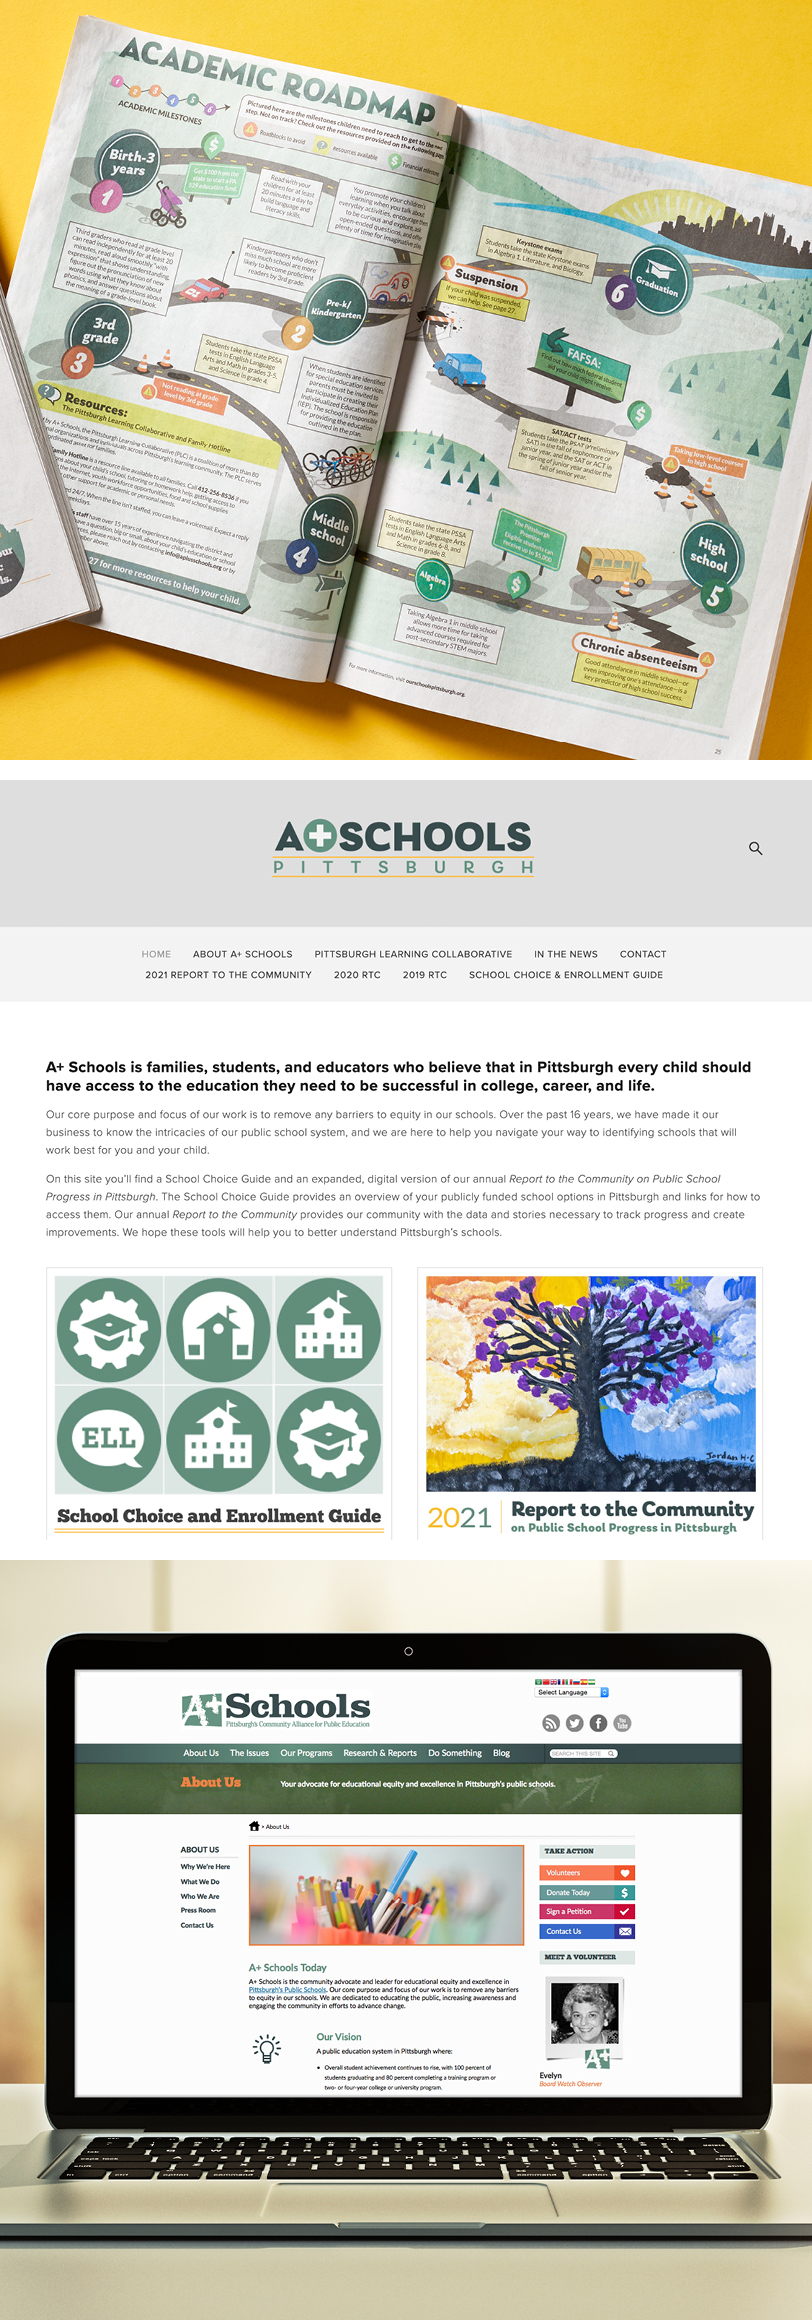 A+ Schools roadmap and landing page